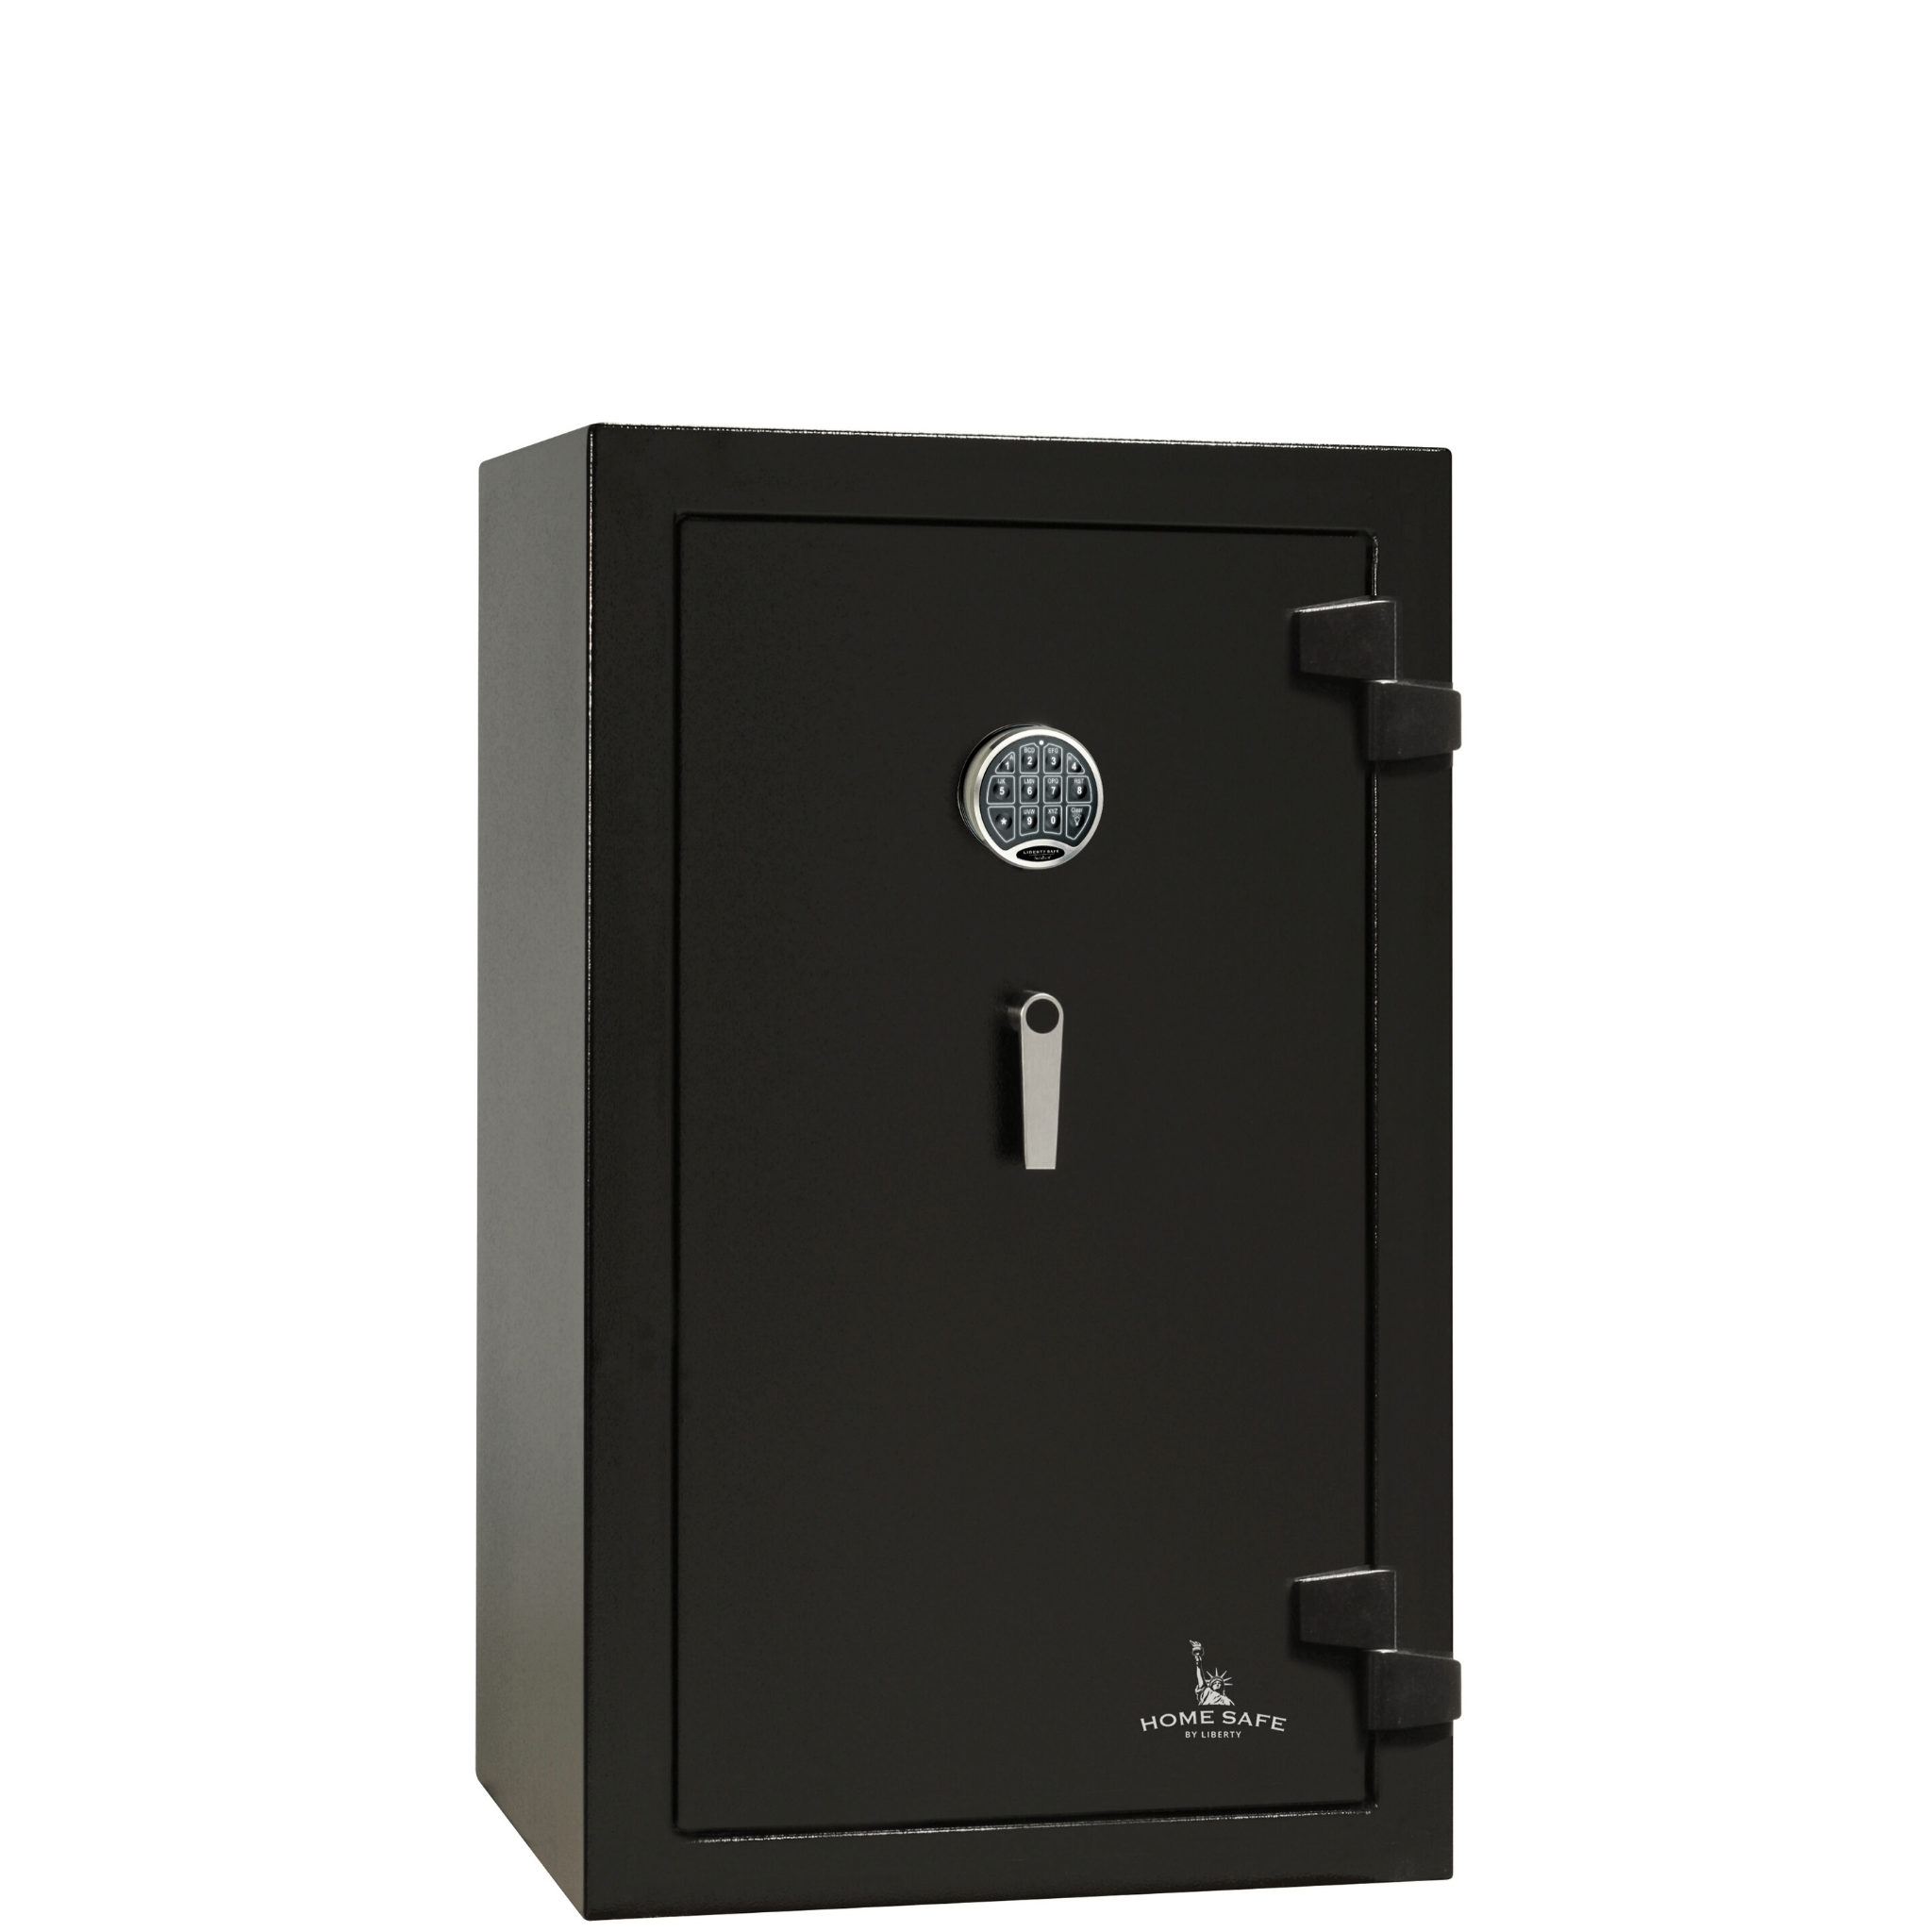 Home Safe | 12 | 60 Minute Fire Protection | Black | Electronic Lock | Dimensions: 42"(H) x 24.25"(W) x 22"(D), photo 1